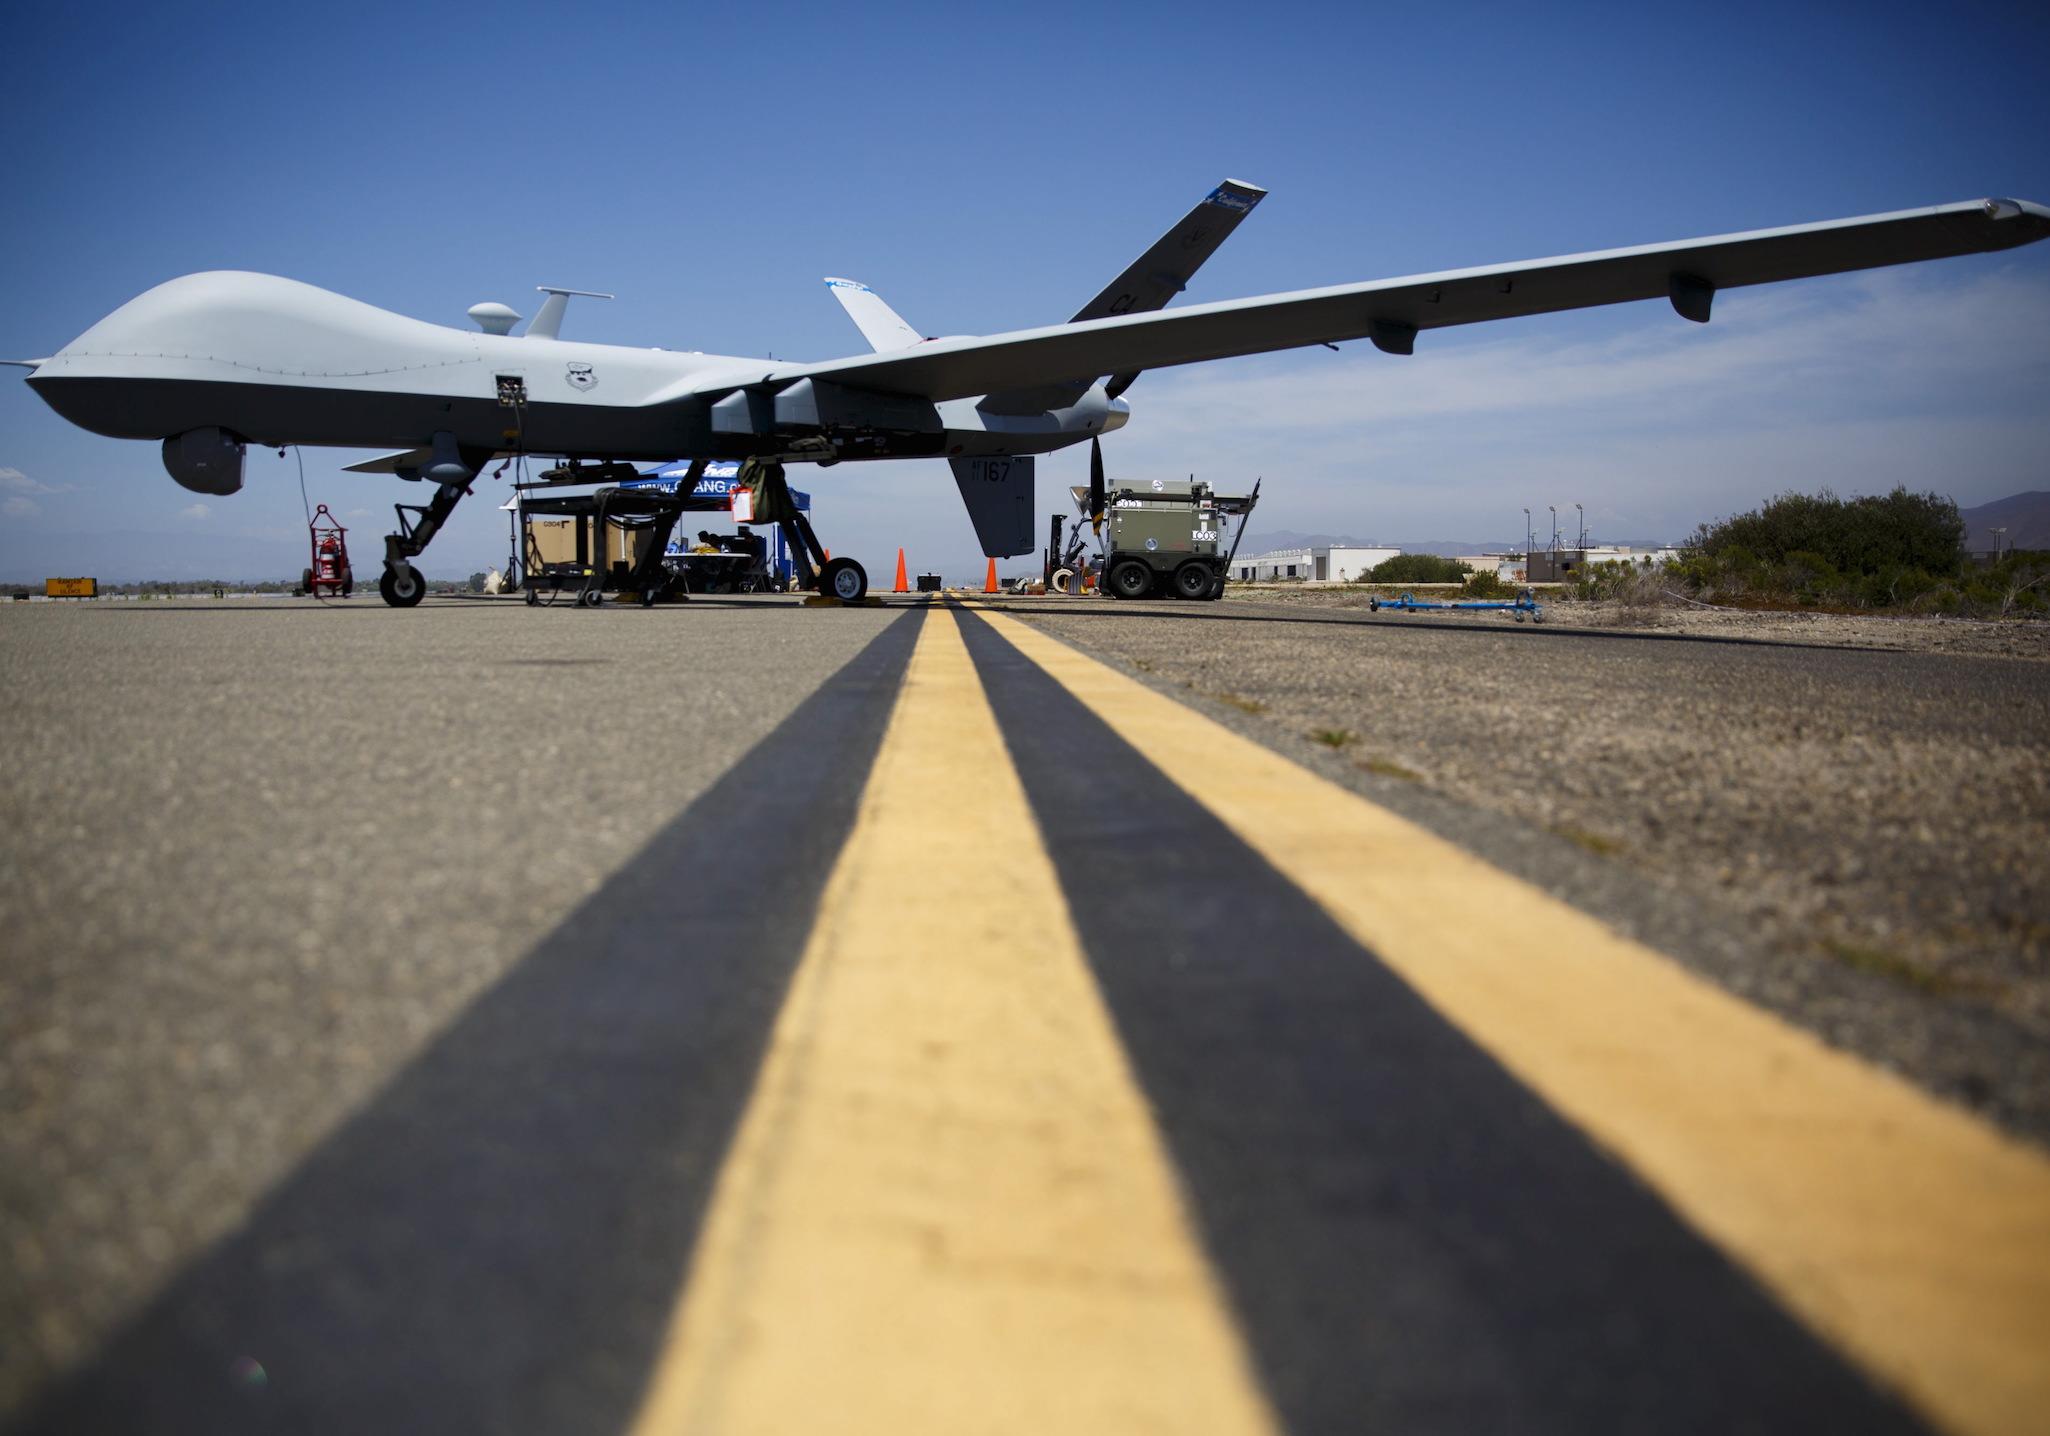 A General Atomics MQ-9 Reaper drone of the kind used for strikes in the Middle East